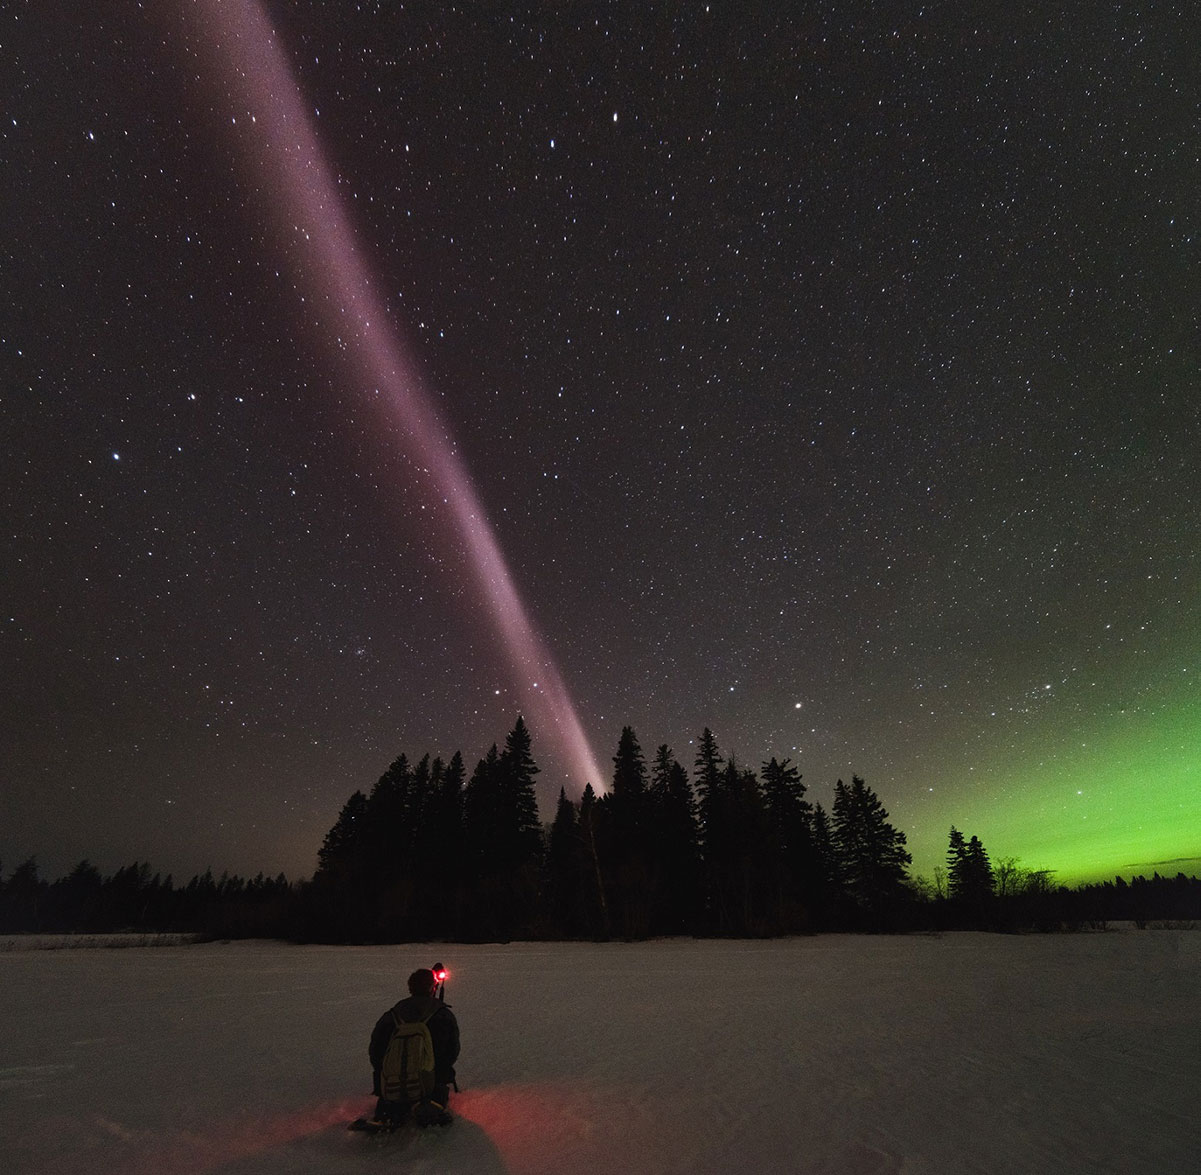 STEVE, Strong Thermal Emission Velocity Enhancement